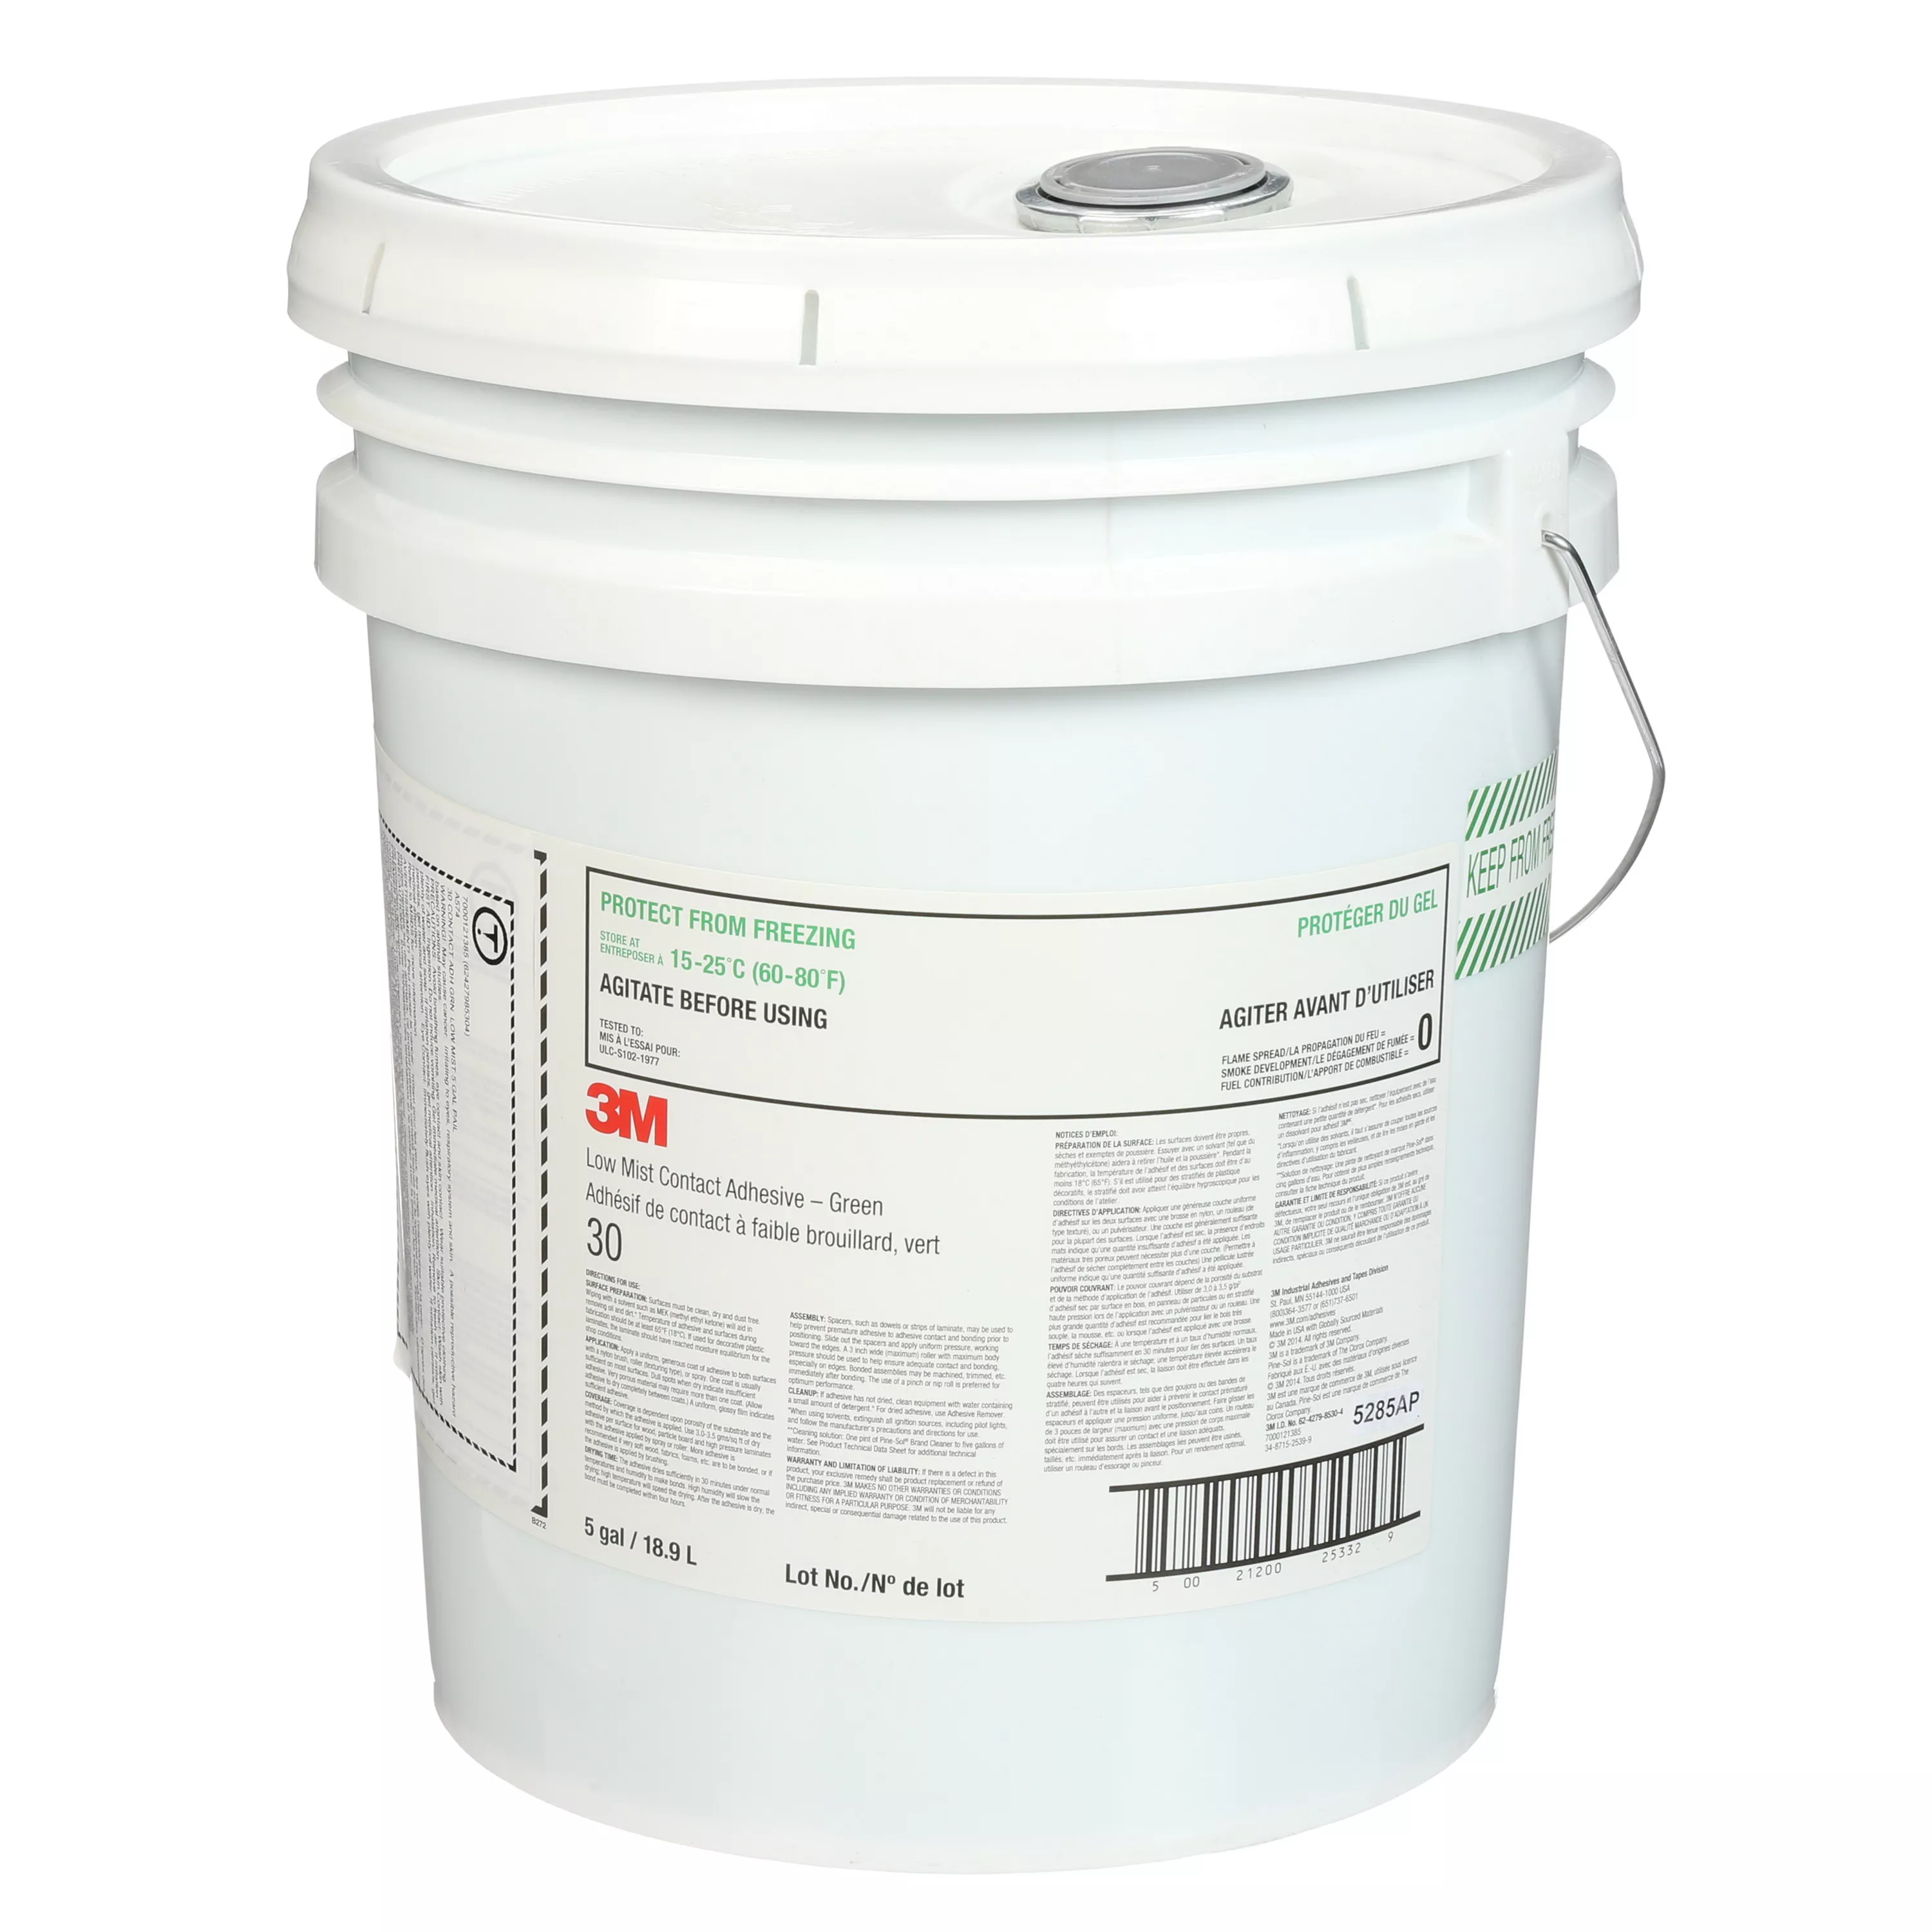 SKU 7000121385 | 3M™ Low Mist Contact Adhesive